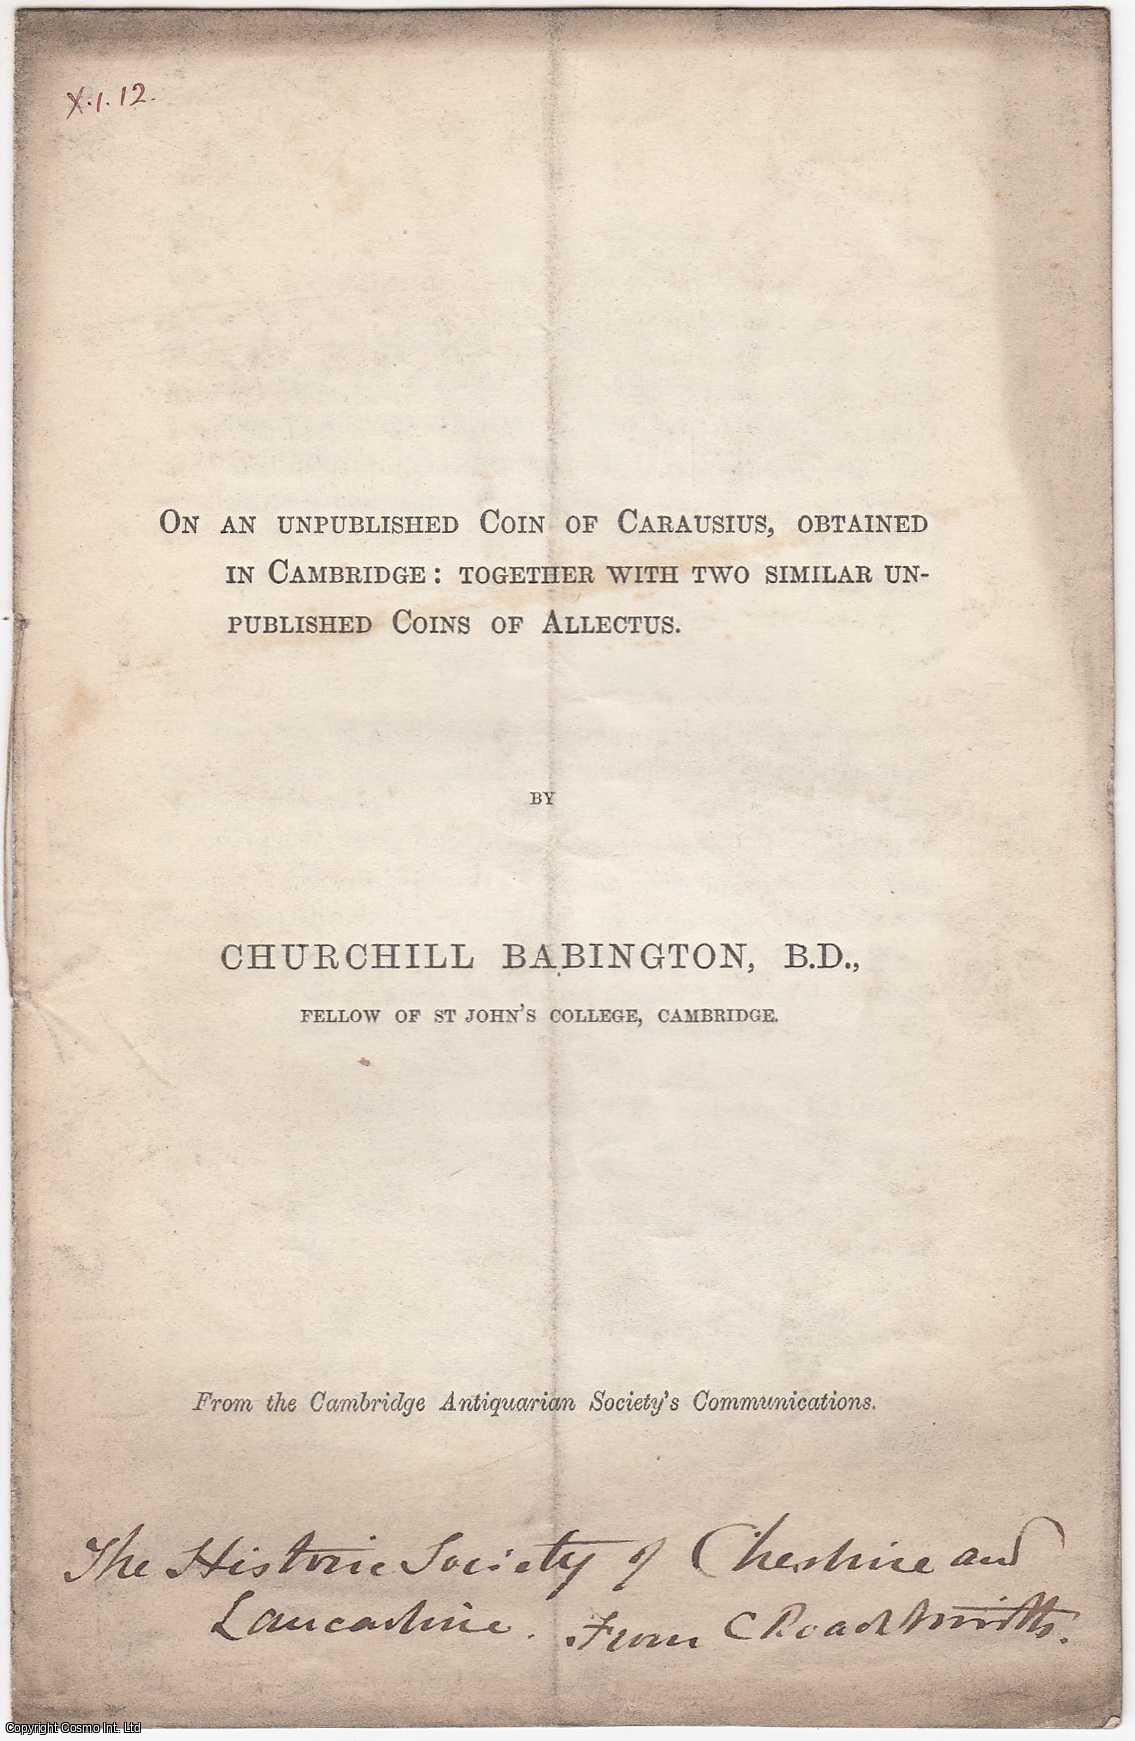 Churchill Babington, B.D., Fellow of St John's College, Cambridge - [1862] On an Unpublished Coin of Carausius, obtained in Cambridge: together with Two Similar unpublished Coins of Allectus. From the Cambridge Antiquarian Society's Communications.